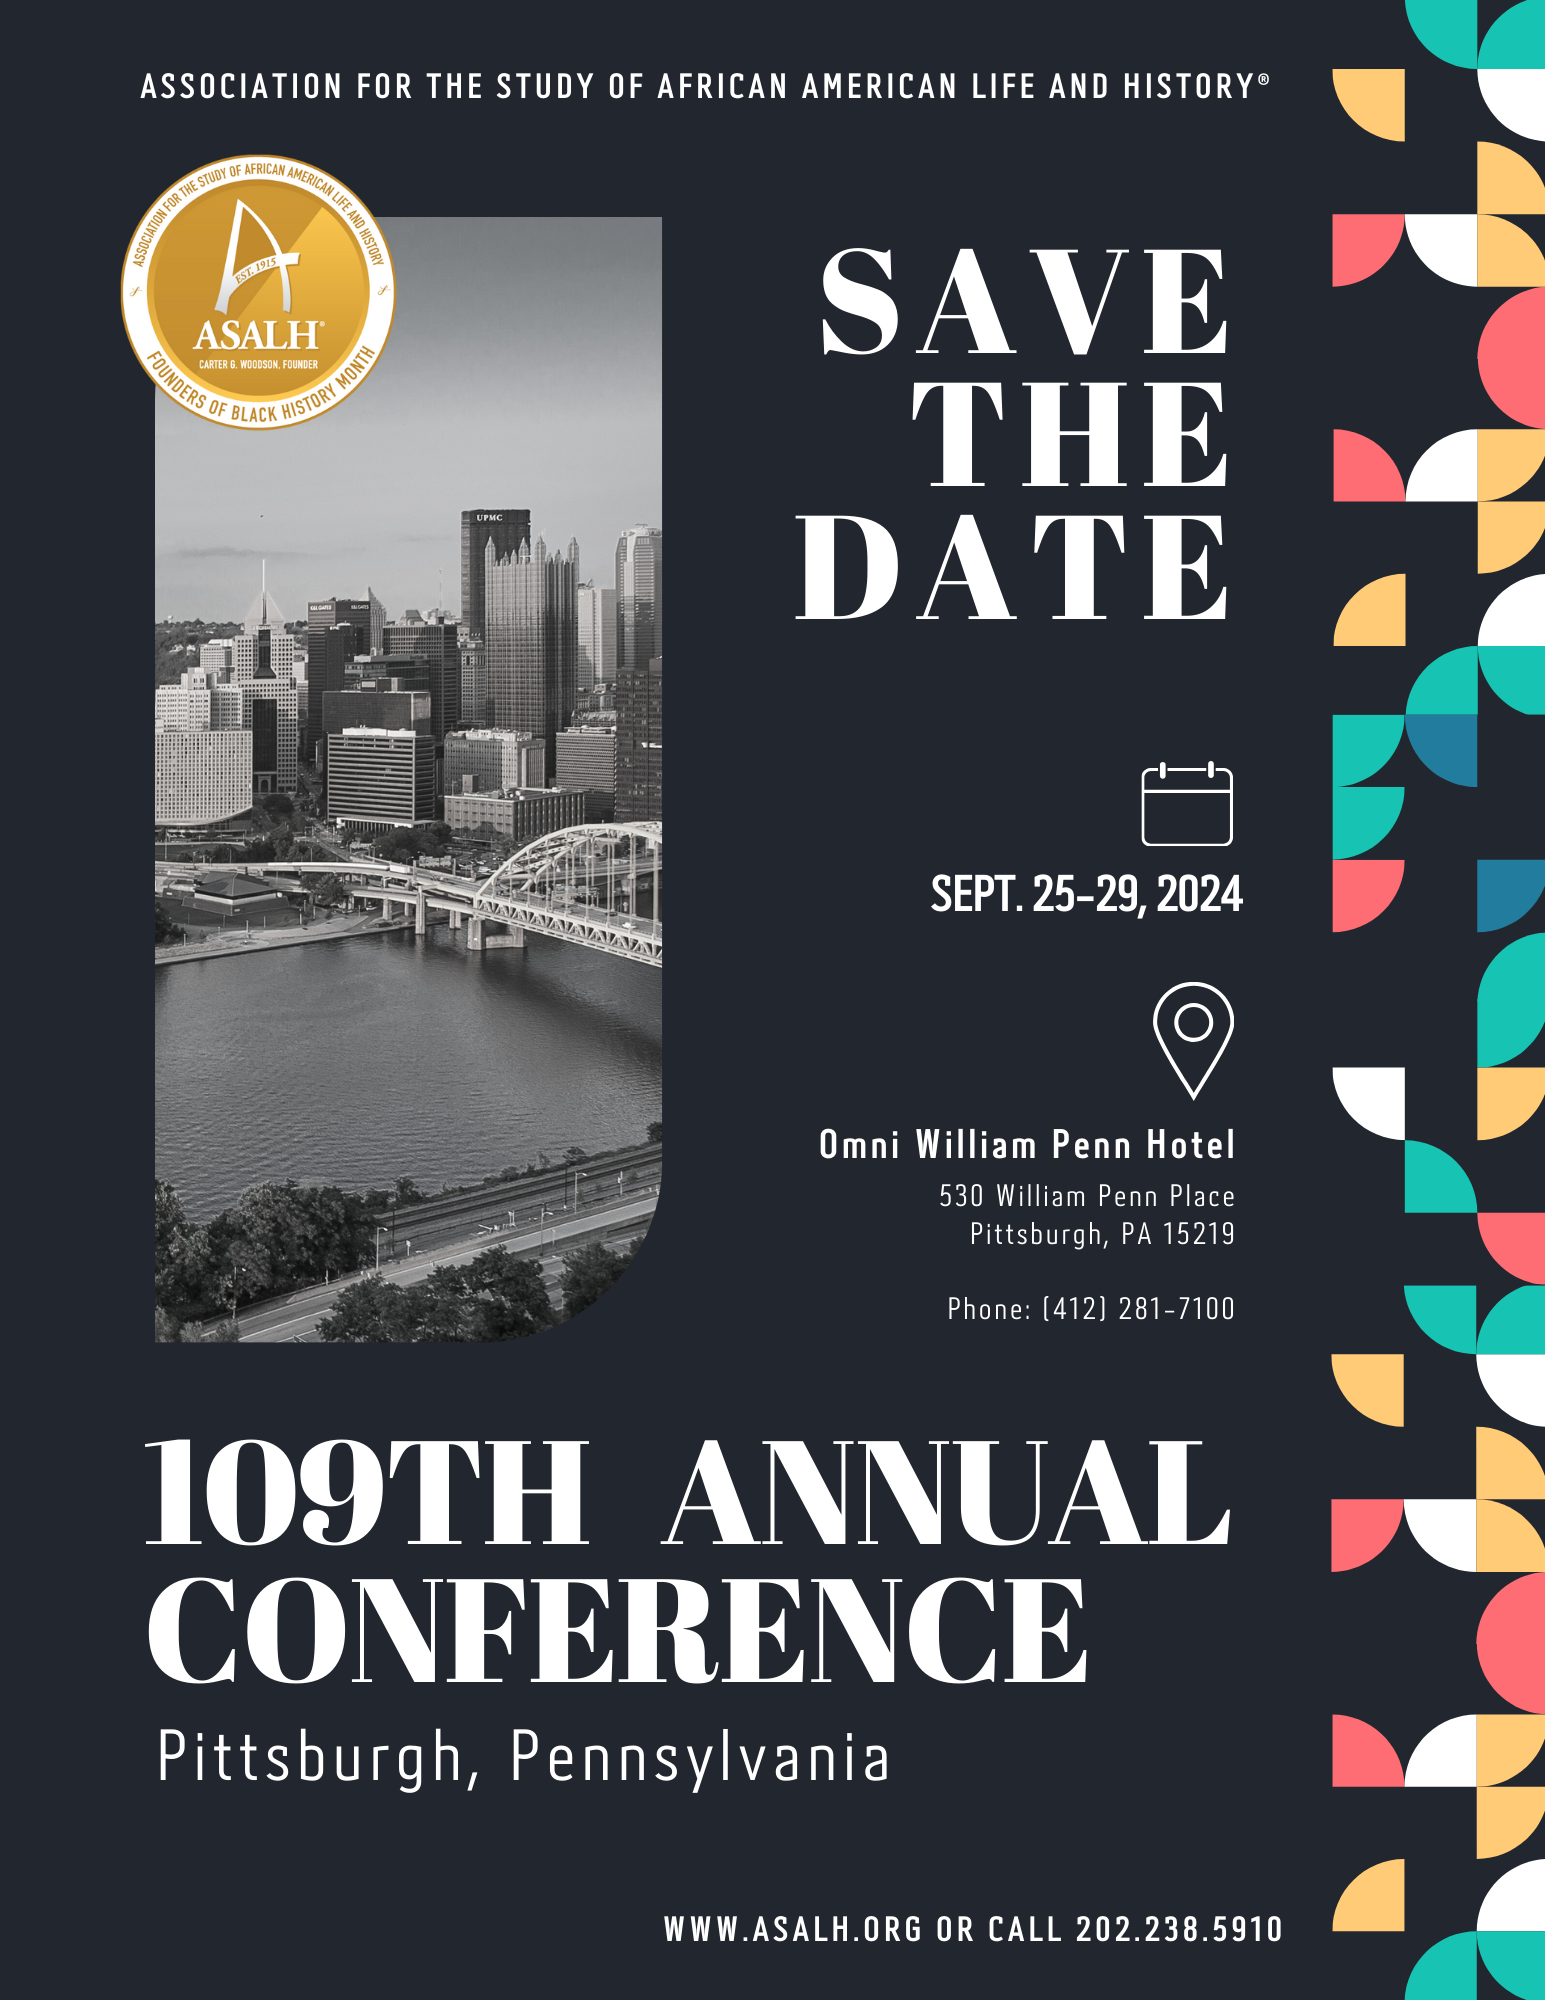 Save the Date! 109th Annual Conference. Pittsburgh, Pennsylvania. Sept. 25-29, 2024.